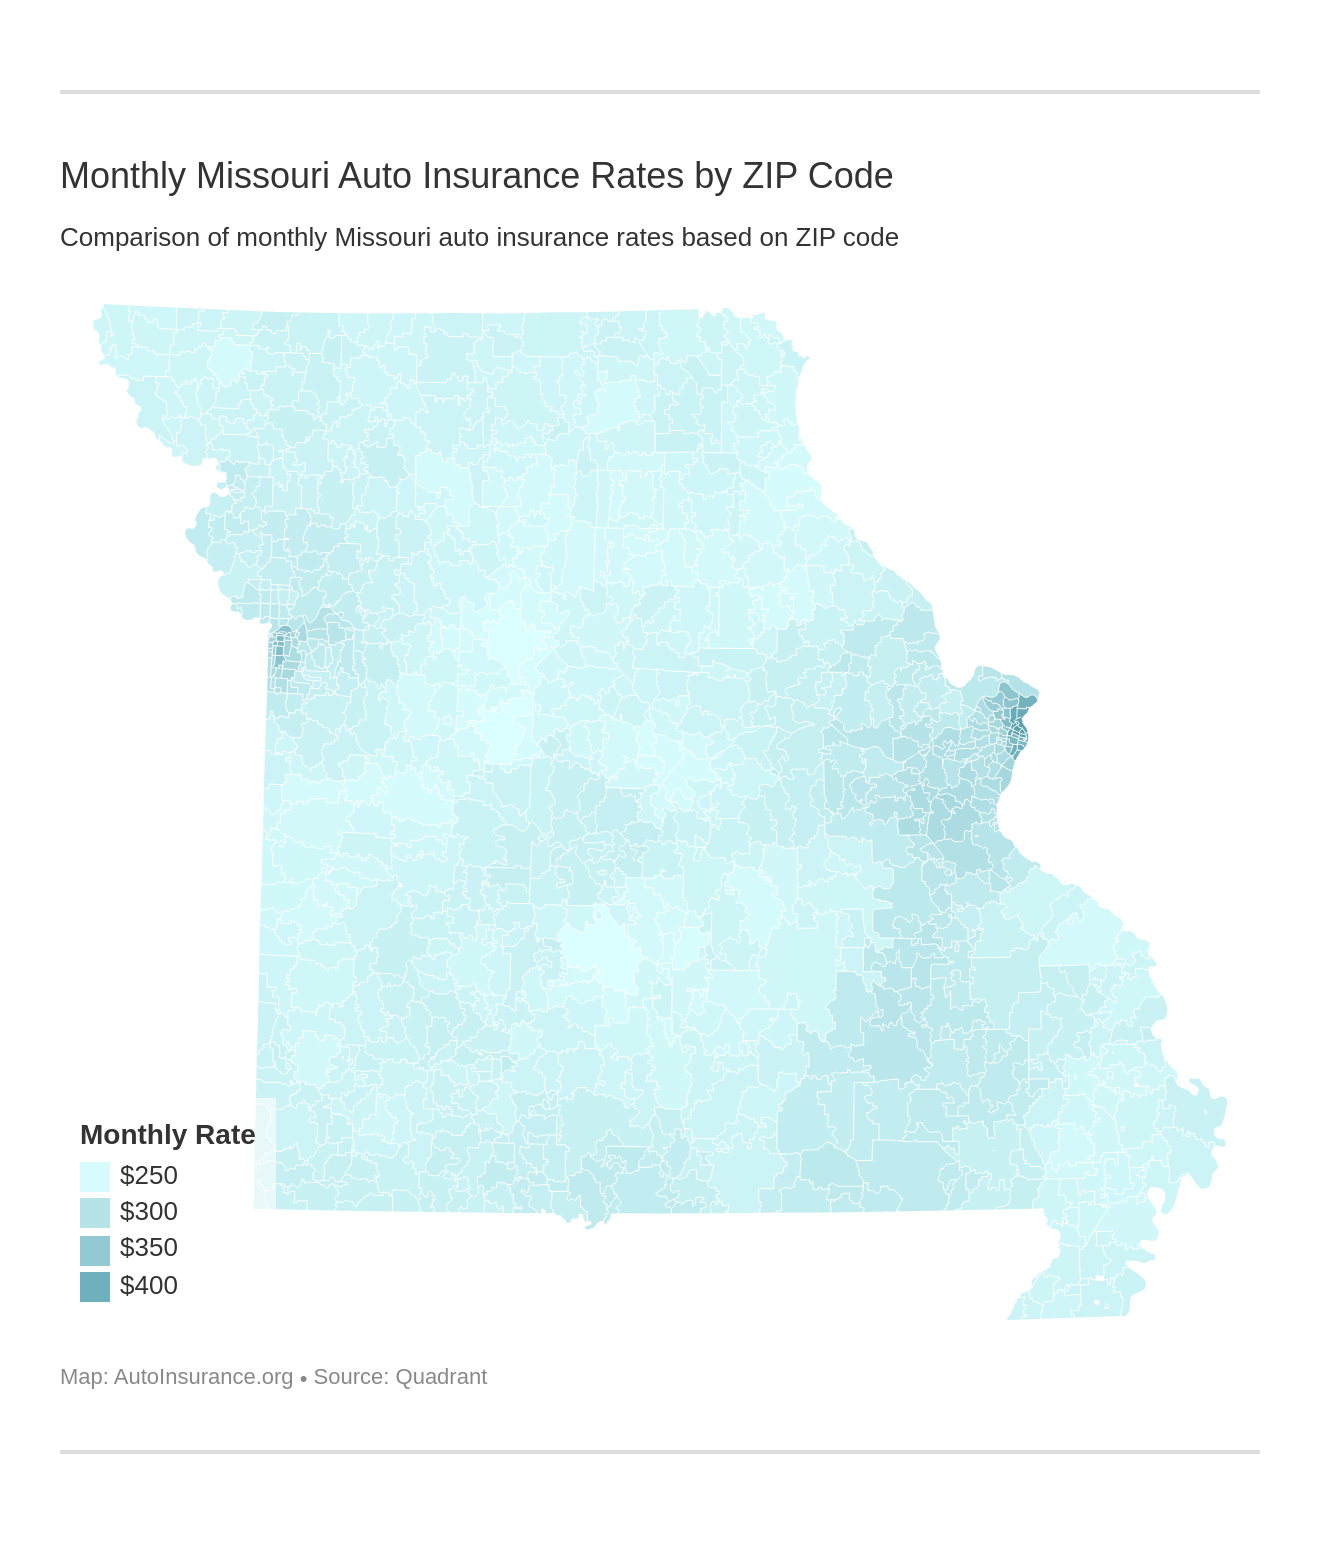 Monthly Missouri Auto Insurance Rates by ZIP Code